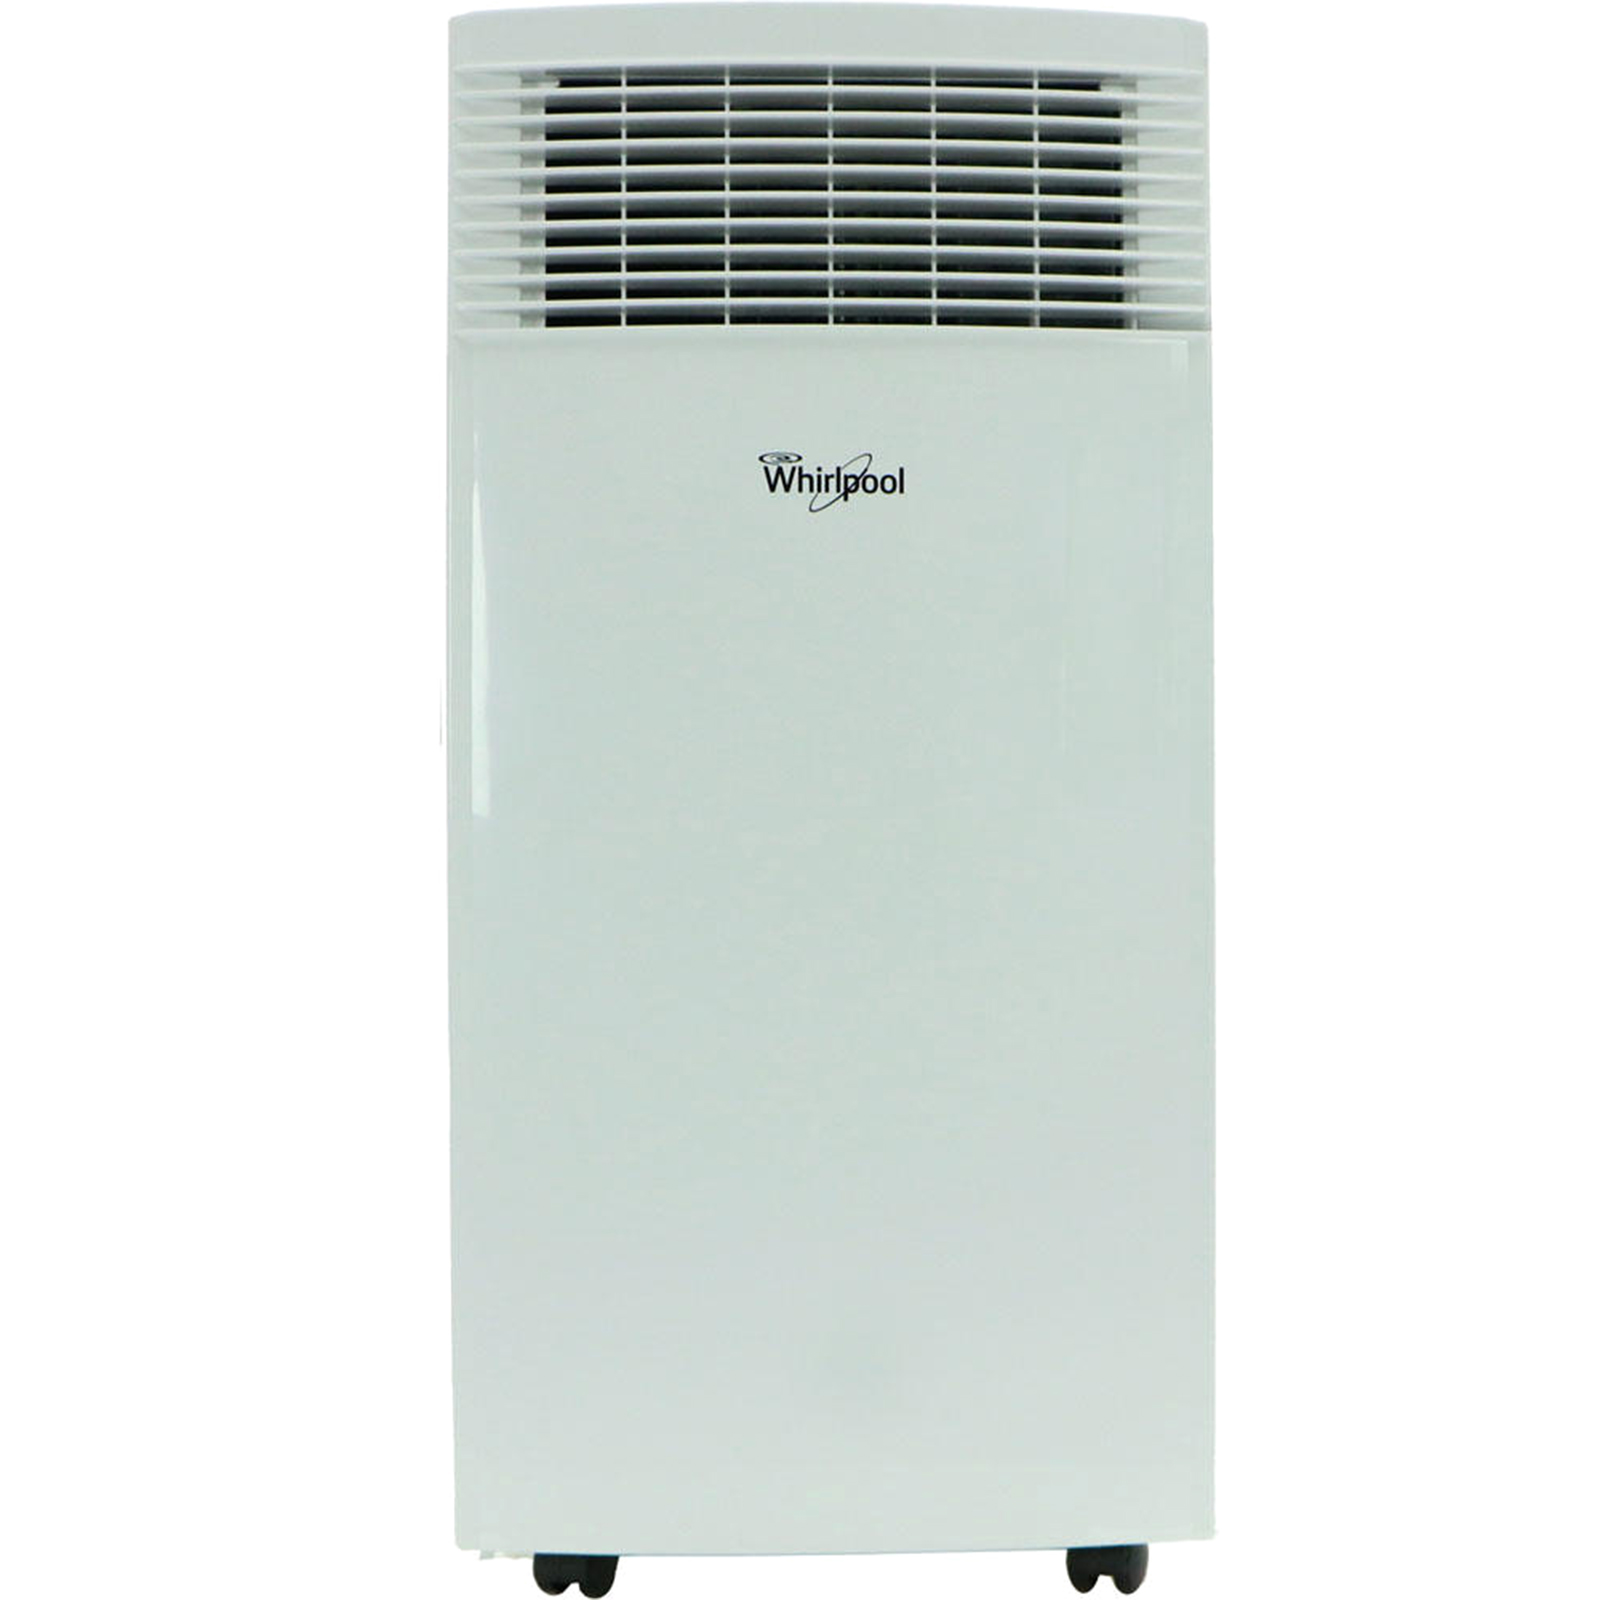 Whirlpool WHAP101AW 10,000BTU Single-Exhaust Portable Air Conditioner with Remote - White